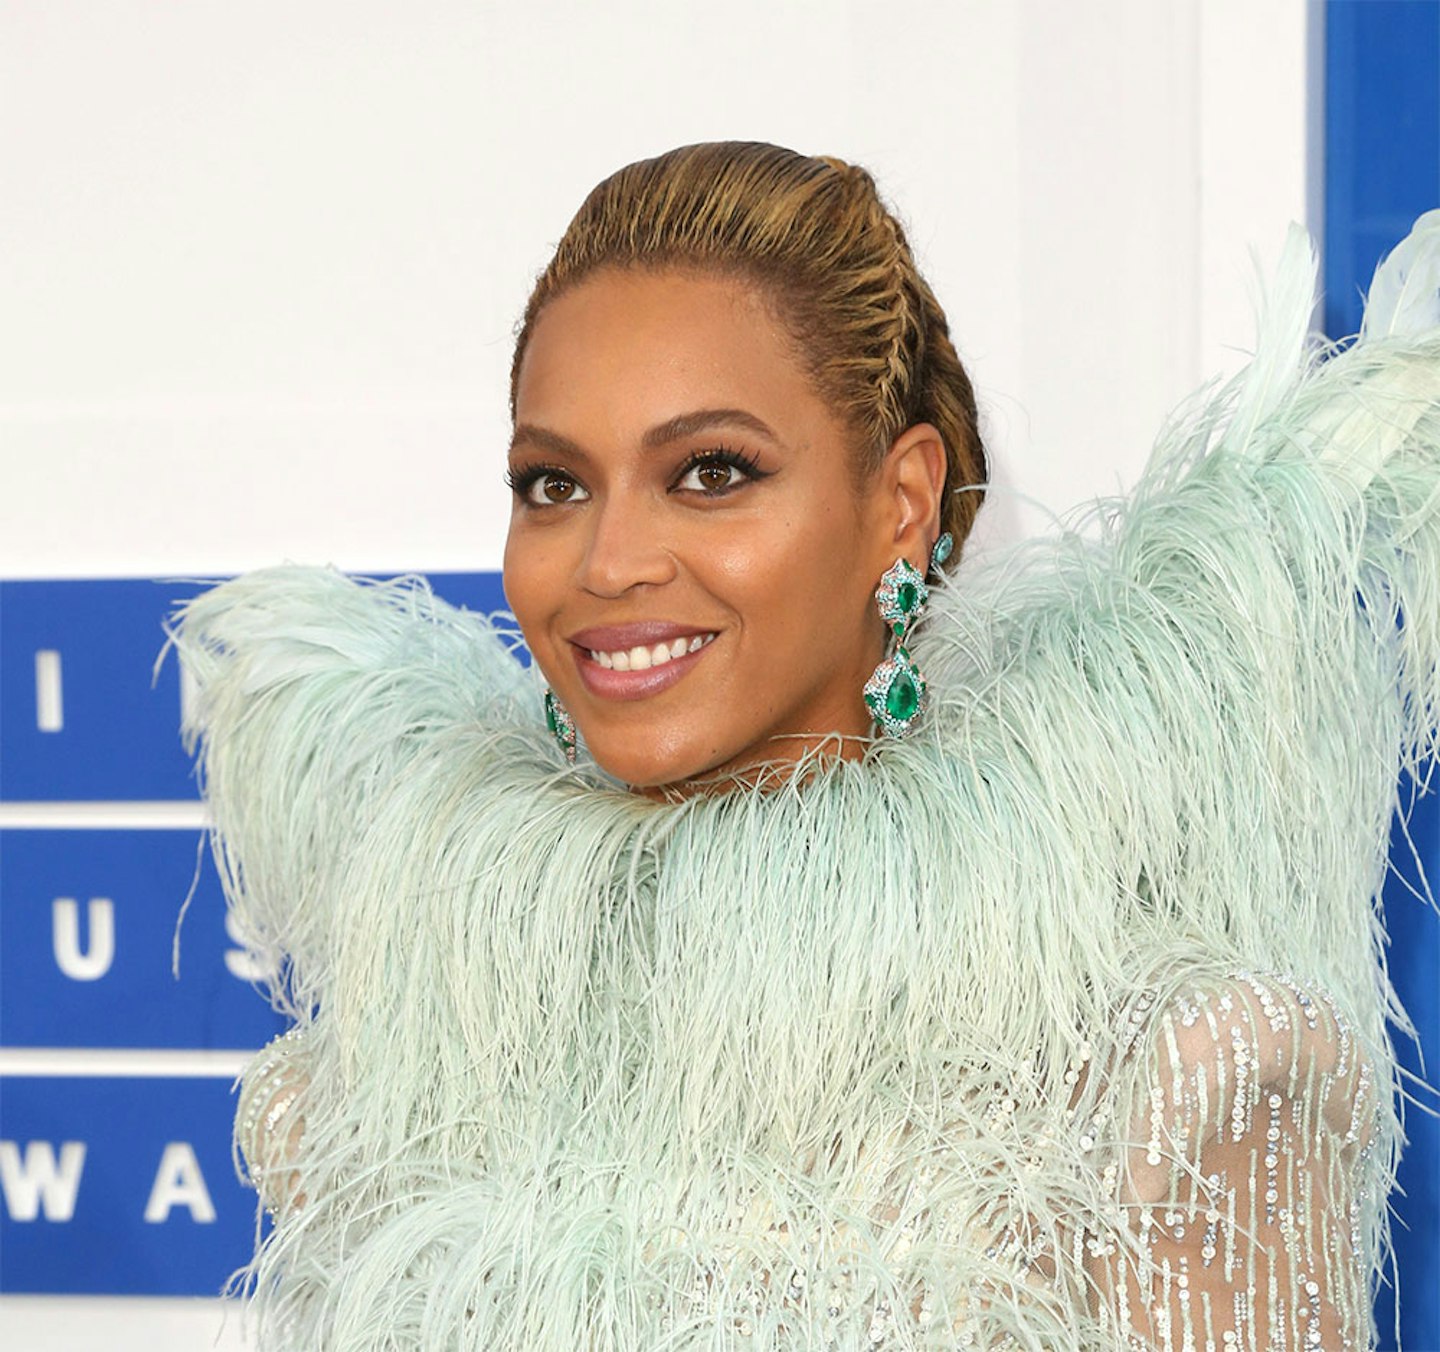 Beyonce arrives at the 2016 MTV Video Music Awards